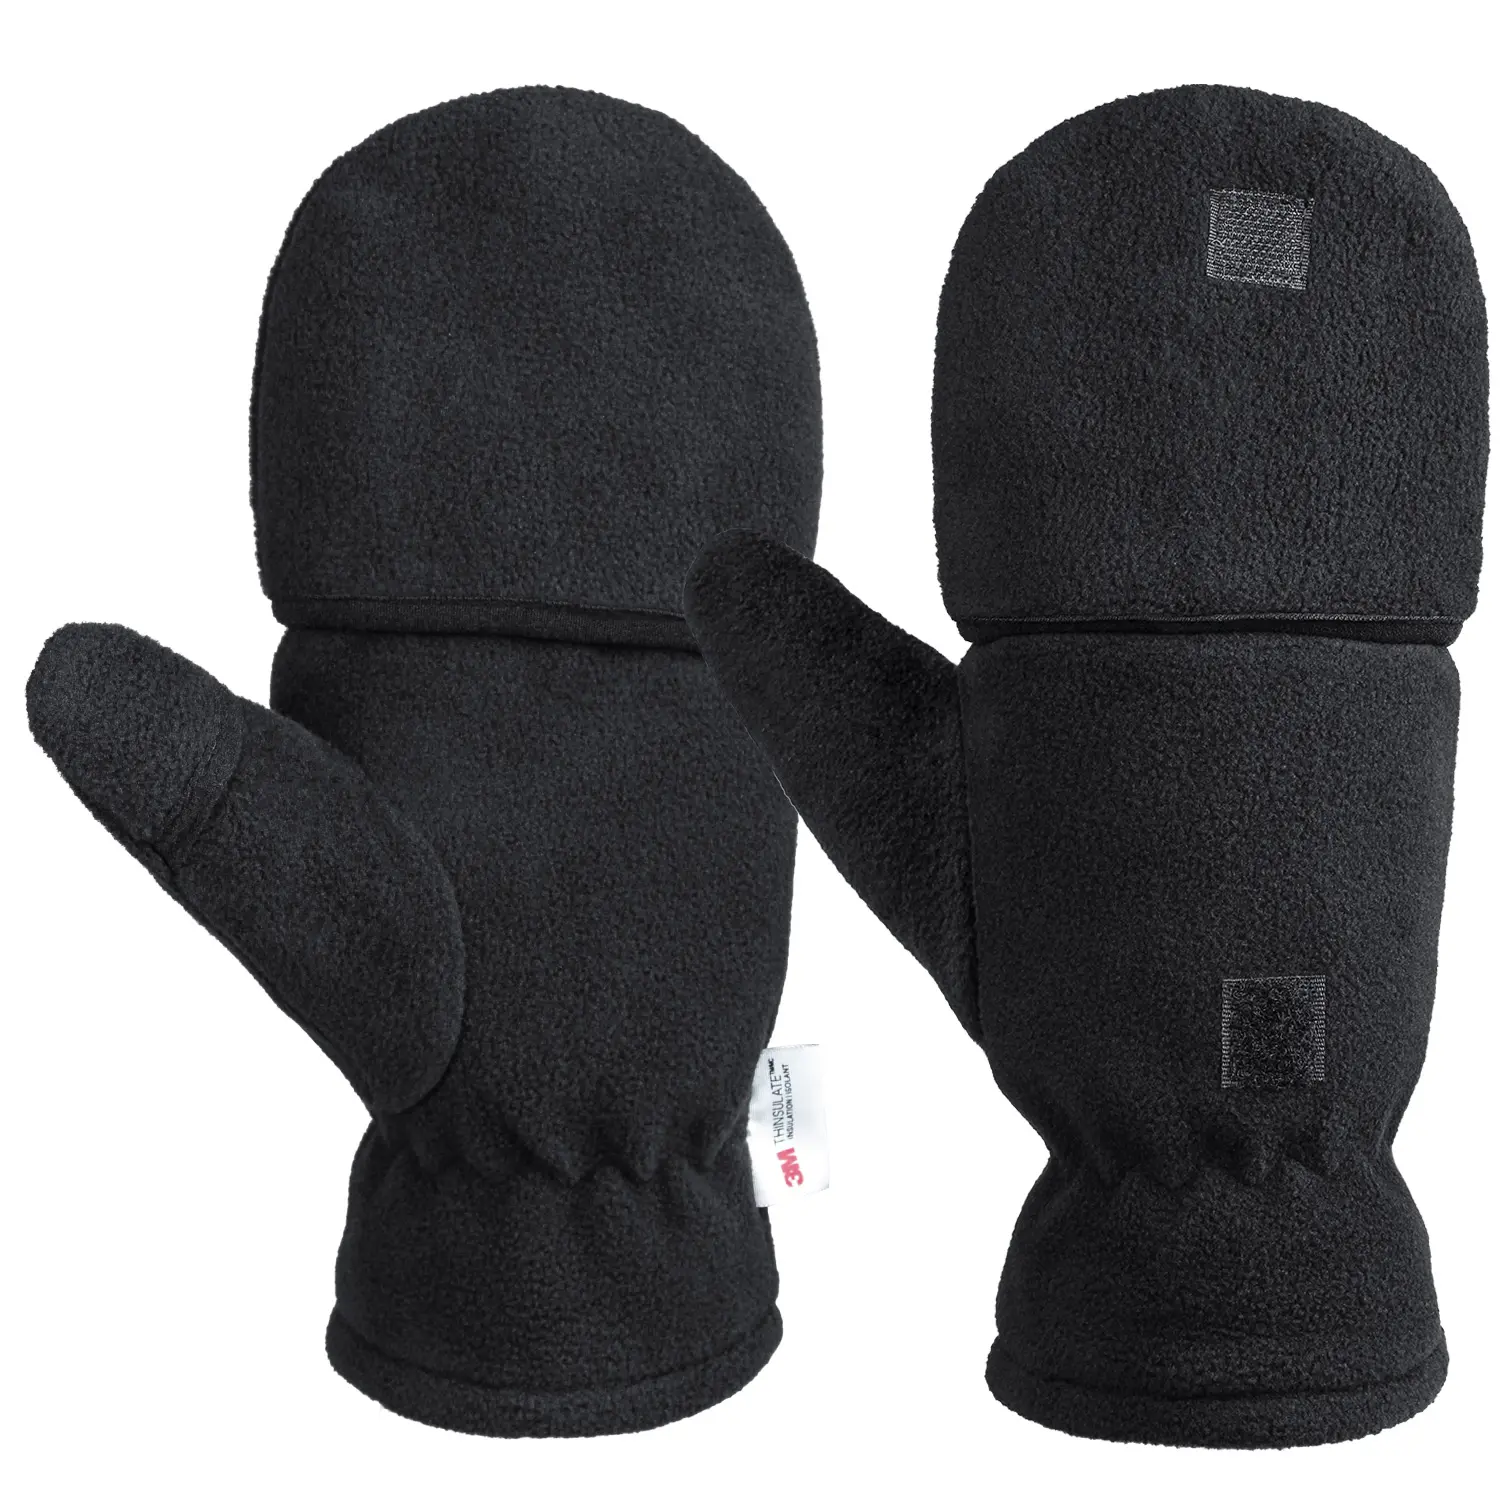 OZERO Winter Gloves Fingerless Convertible Thermal Mittens Windproof Insulated Polar Fleece Warm For Men And Women